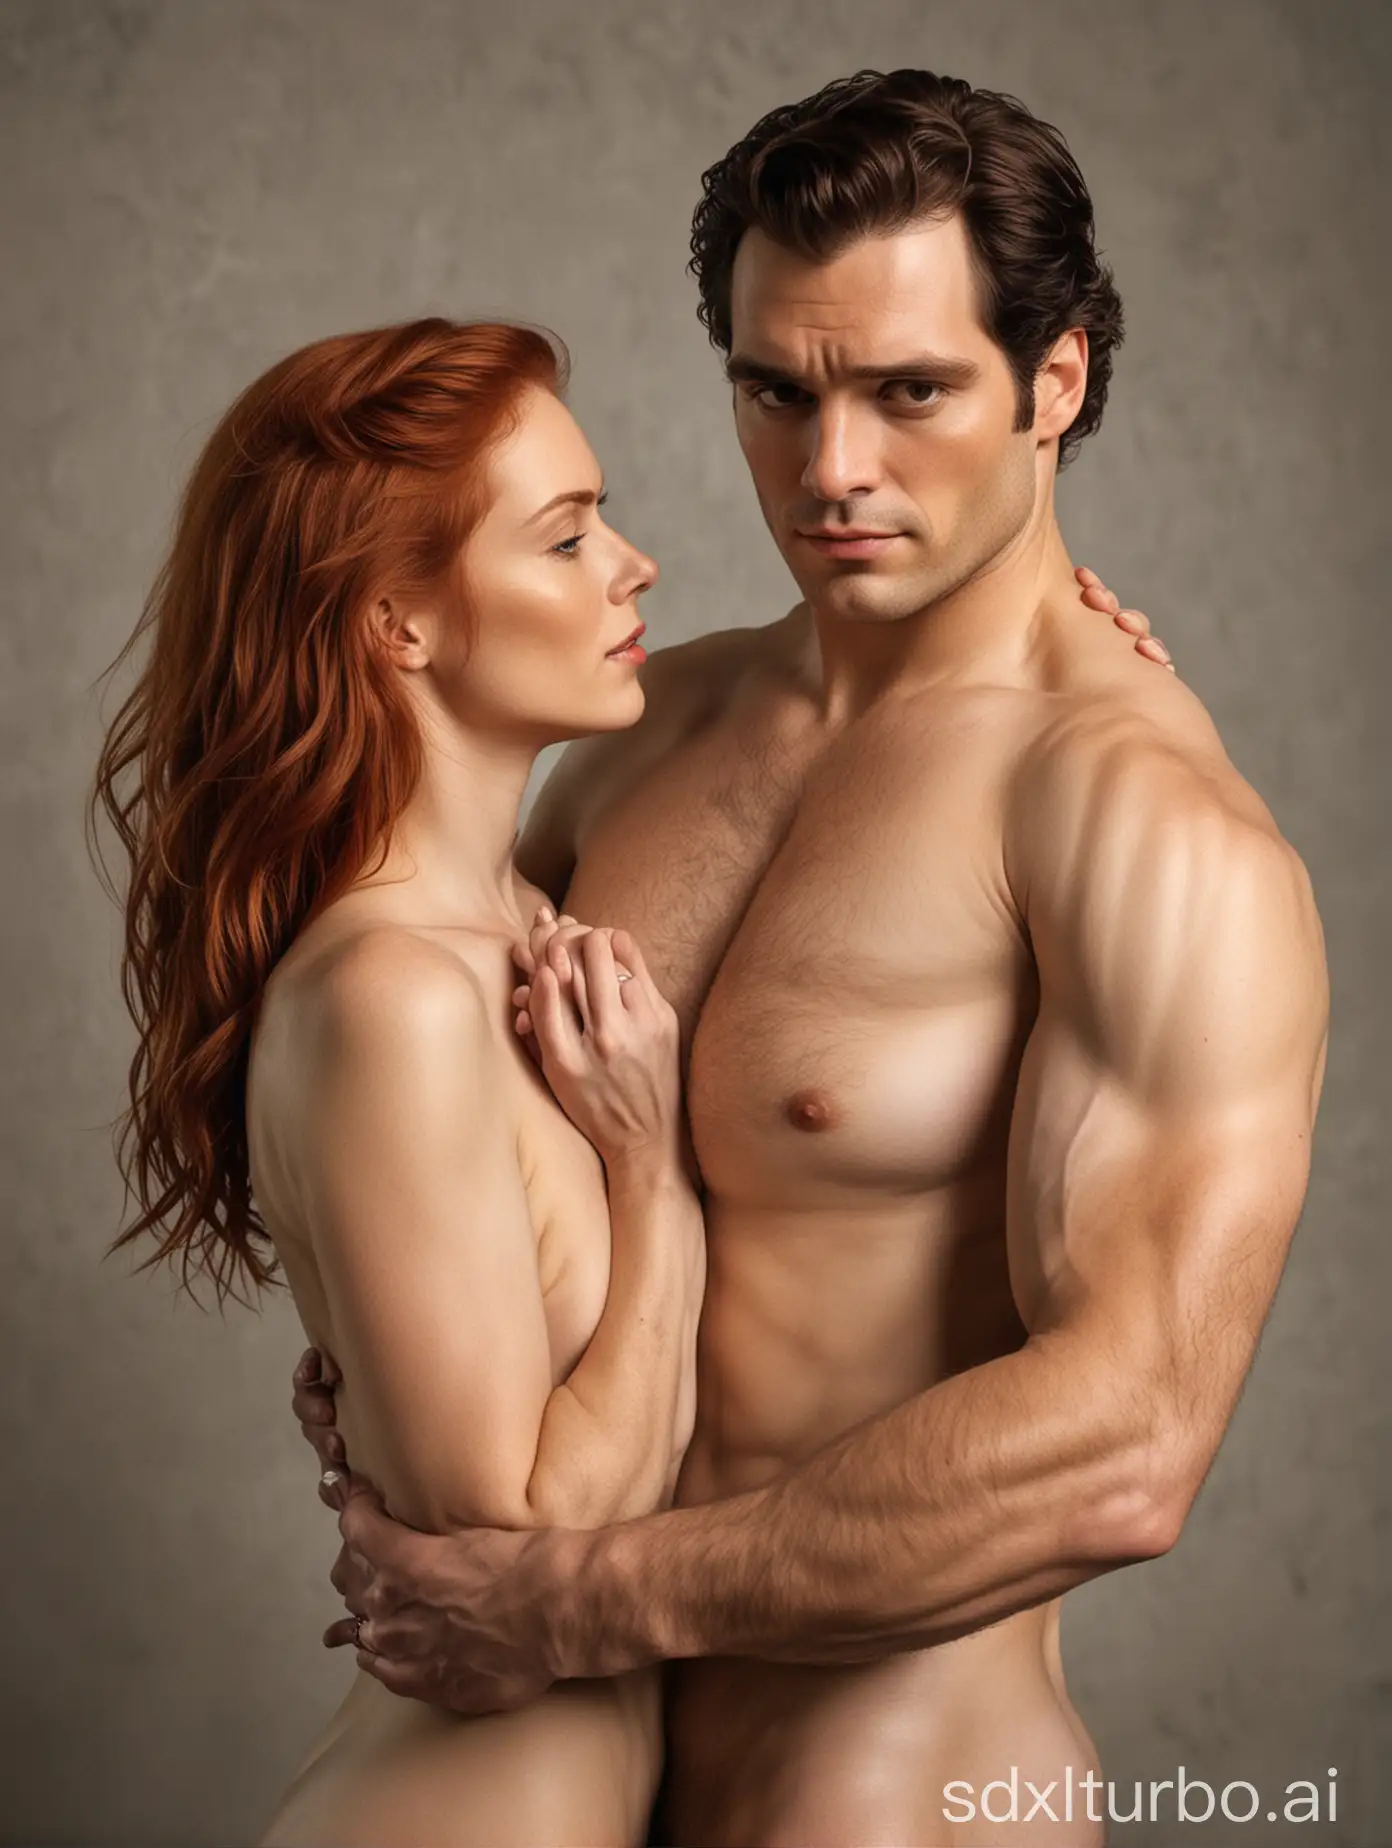 Male Henry Cavill in an embrace with nude redhair woman posing standing in studio